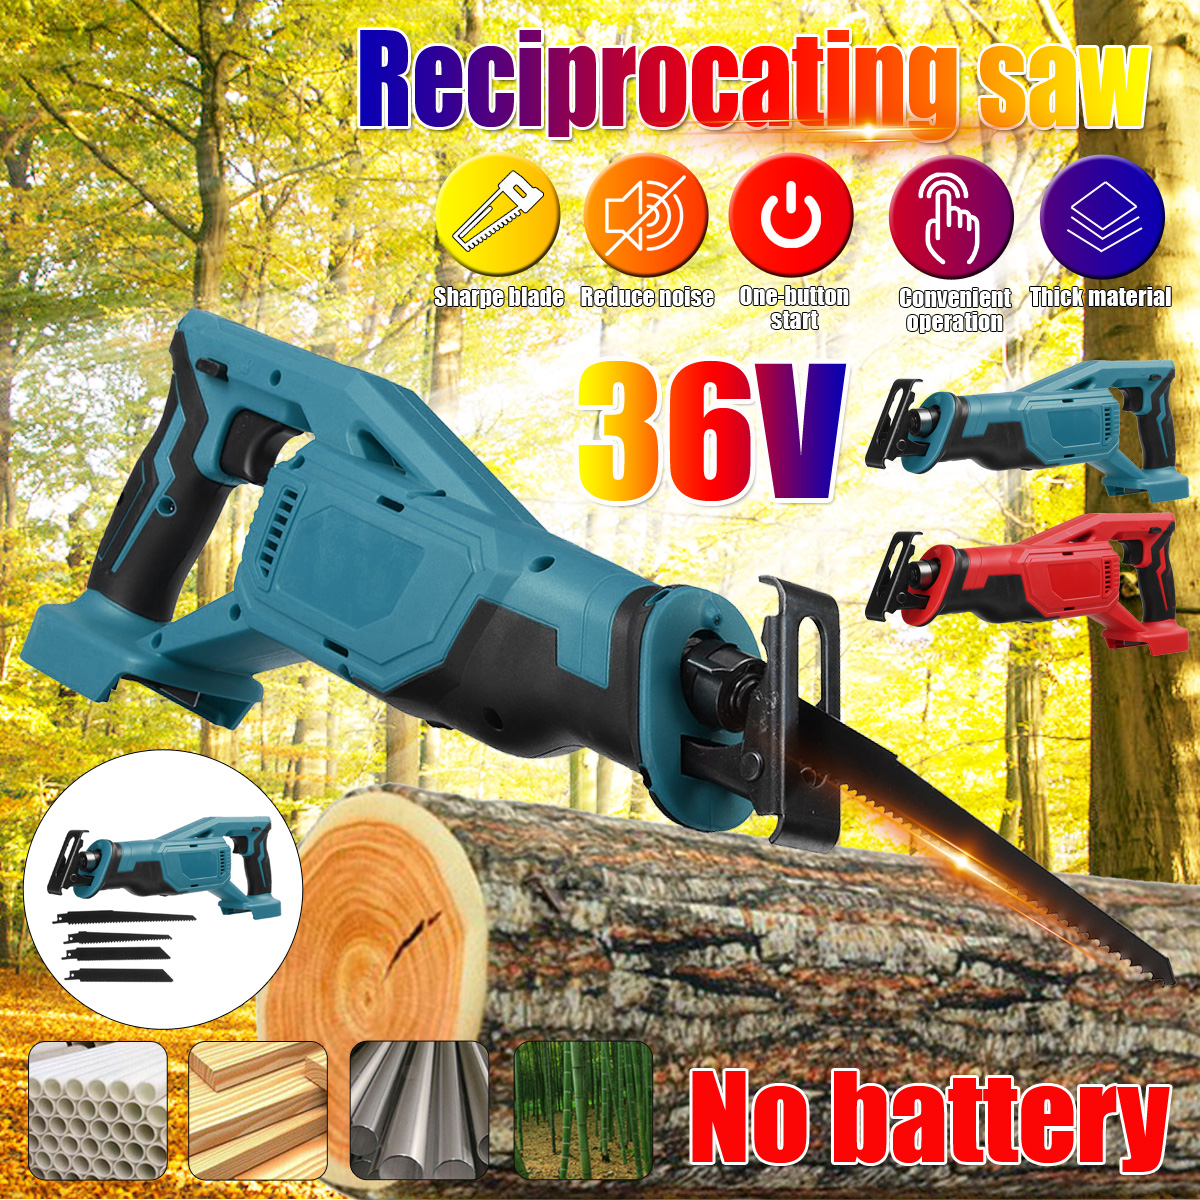 Cordless-Electric-Reciprocating-Saw-PVC-Pipes-Wood-Metal-Cutter-Without-Battery-1816495-1